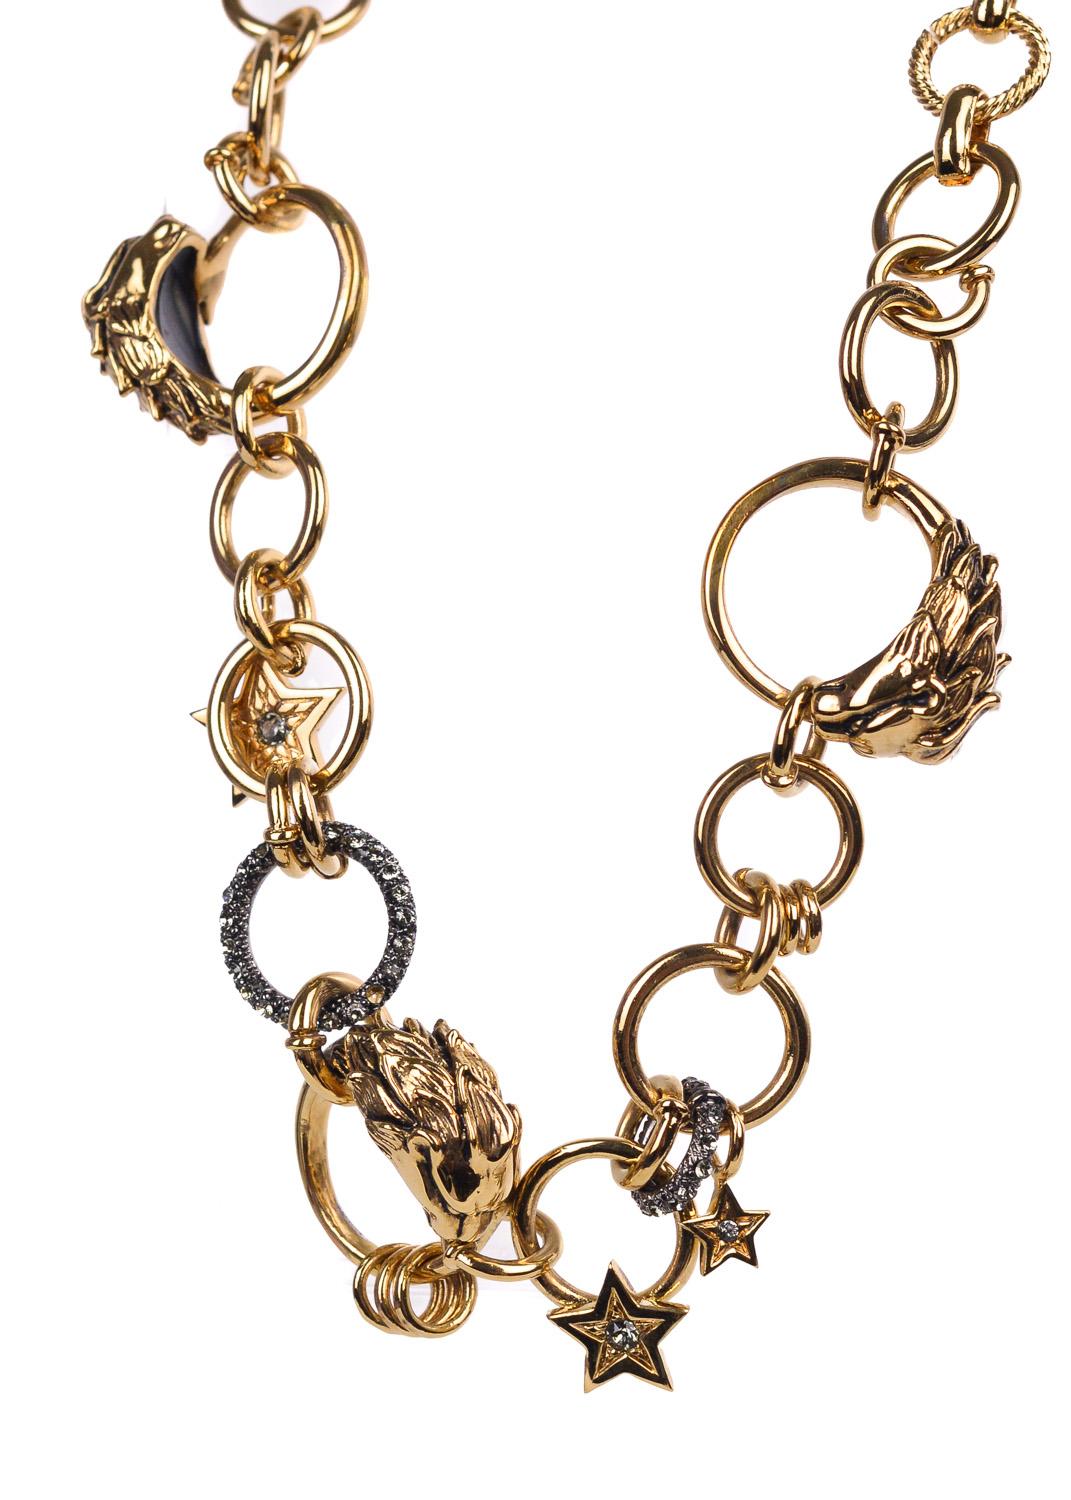 Exceed all artistic standards when in your Gold Roberto Cavalli Choker. This necklace features the classic Belcher chain link, gold lion head rings, and grey swarovski crystal embedded star ringed charms. You can pair this choker with that sheer